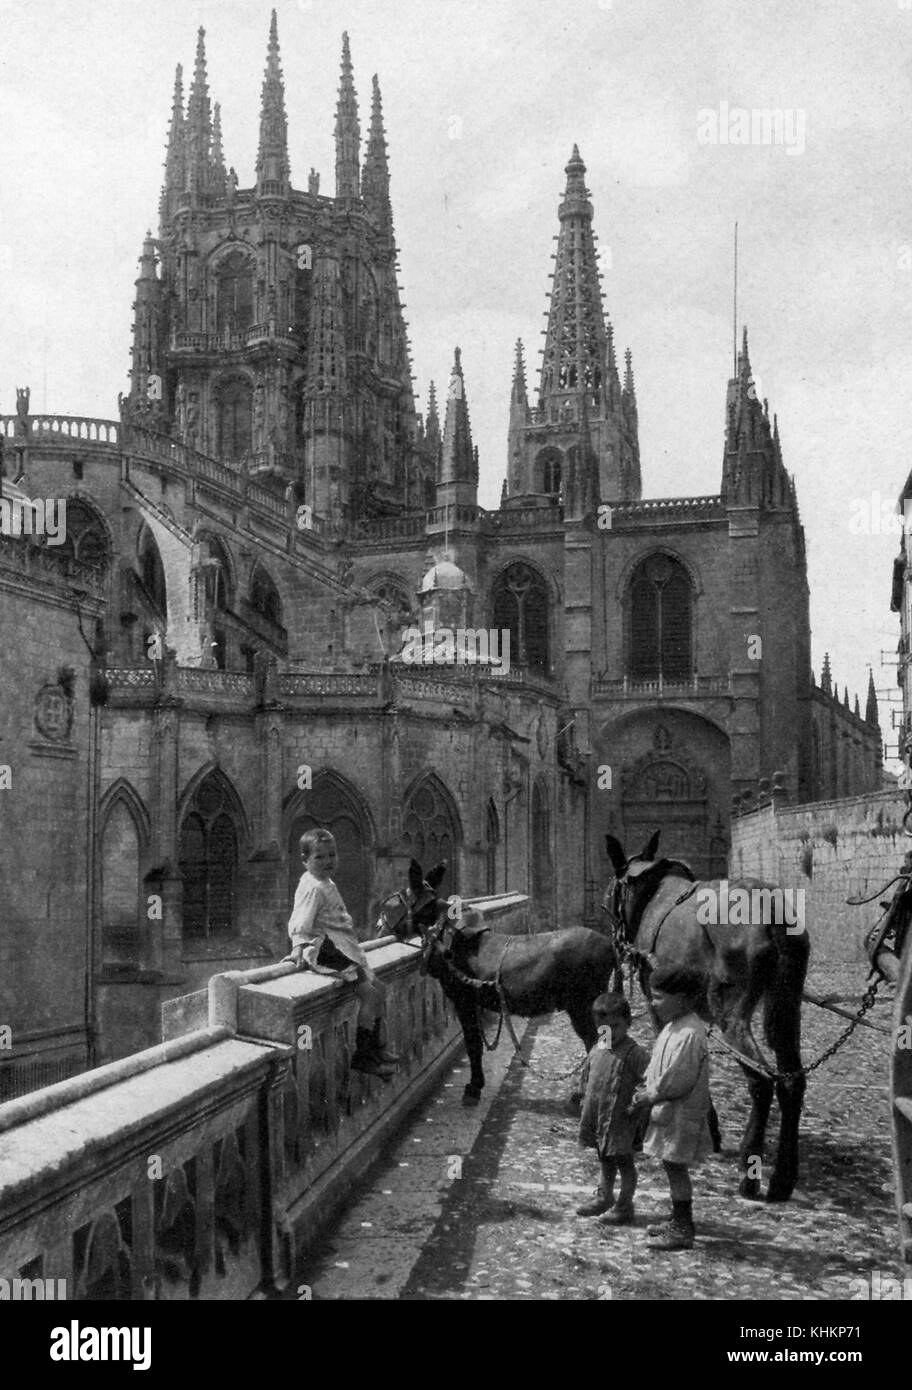 Burgos Cathedral, with small boys and donkeys standing in the foreground, Spain, 1922. Stock Photo